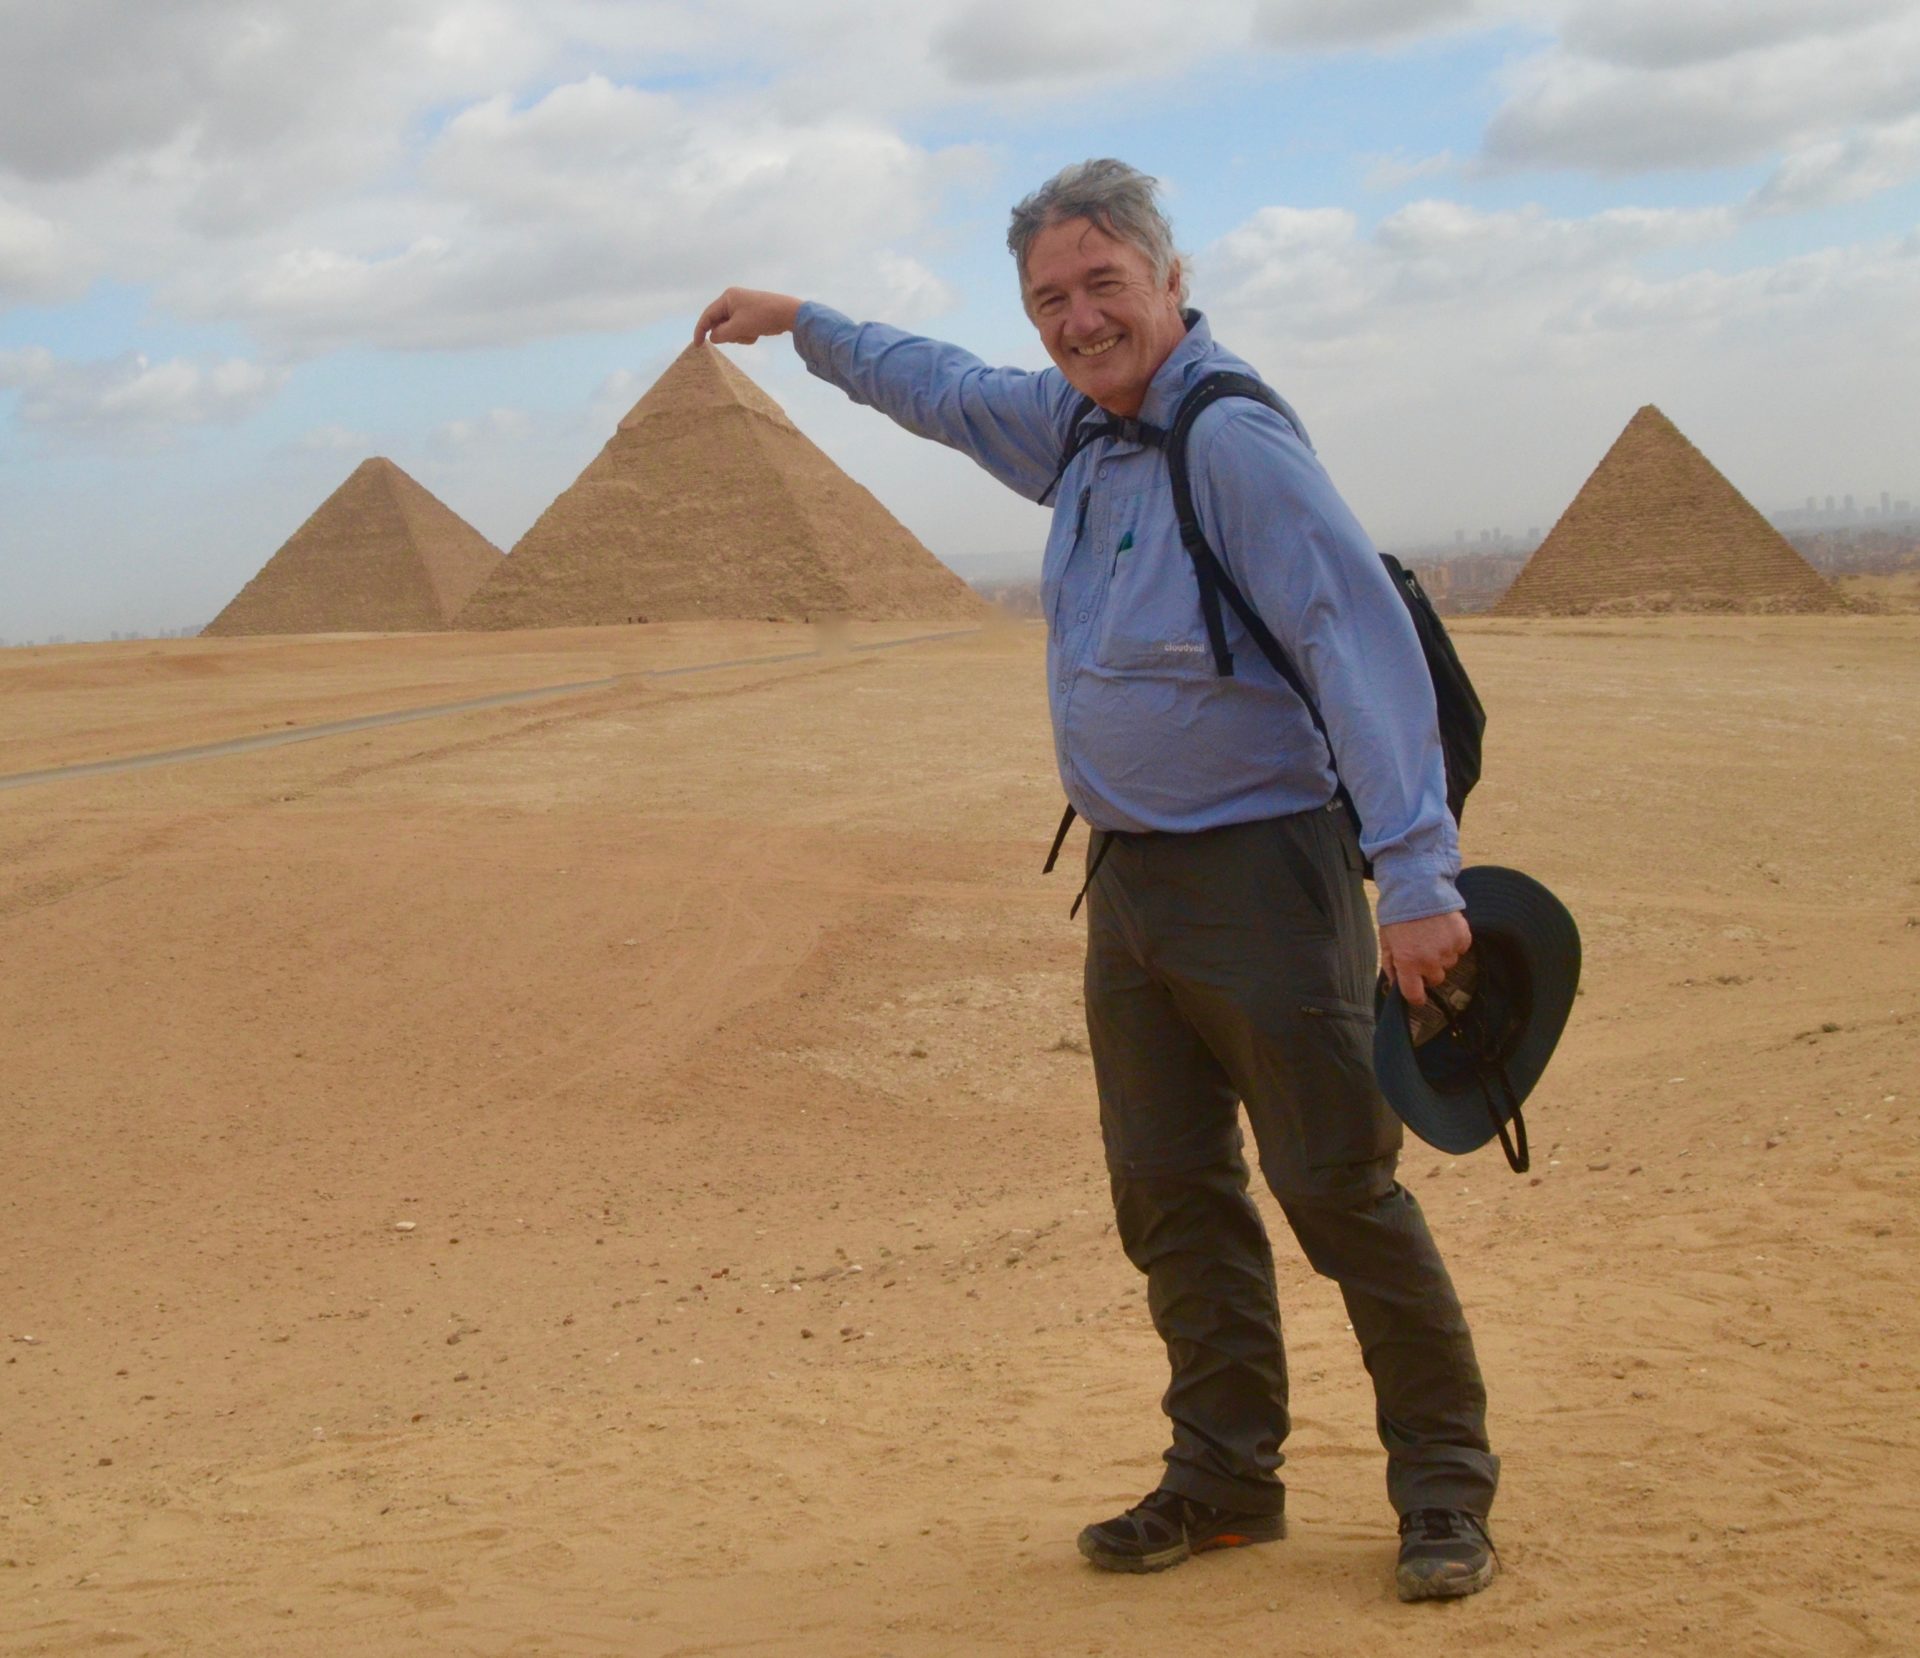 Touching the Top of the Pyramids